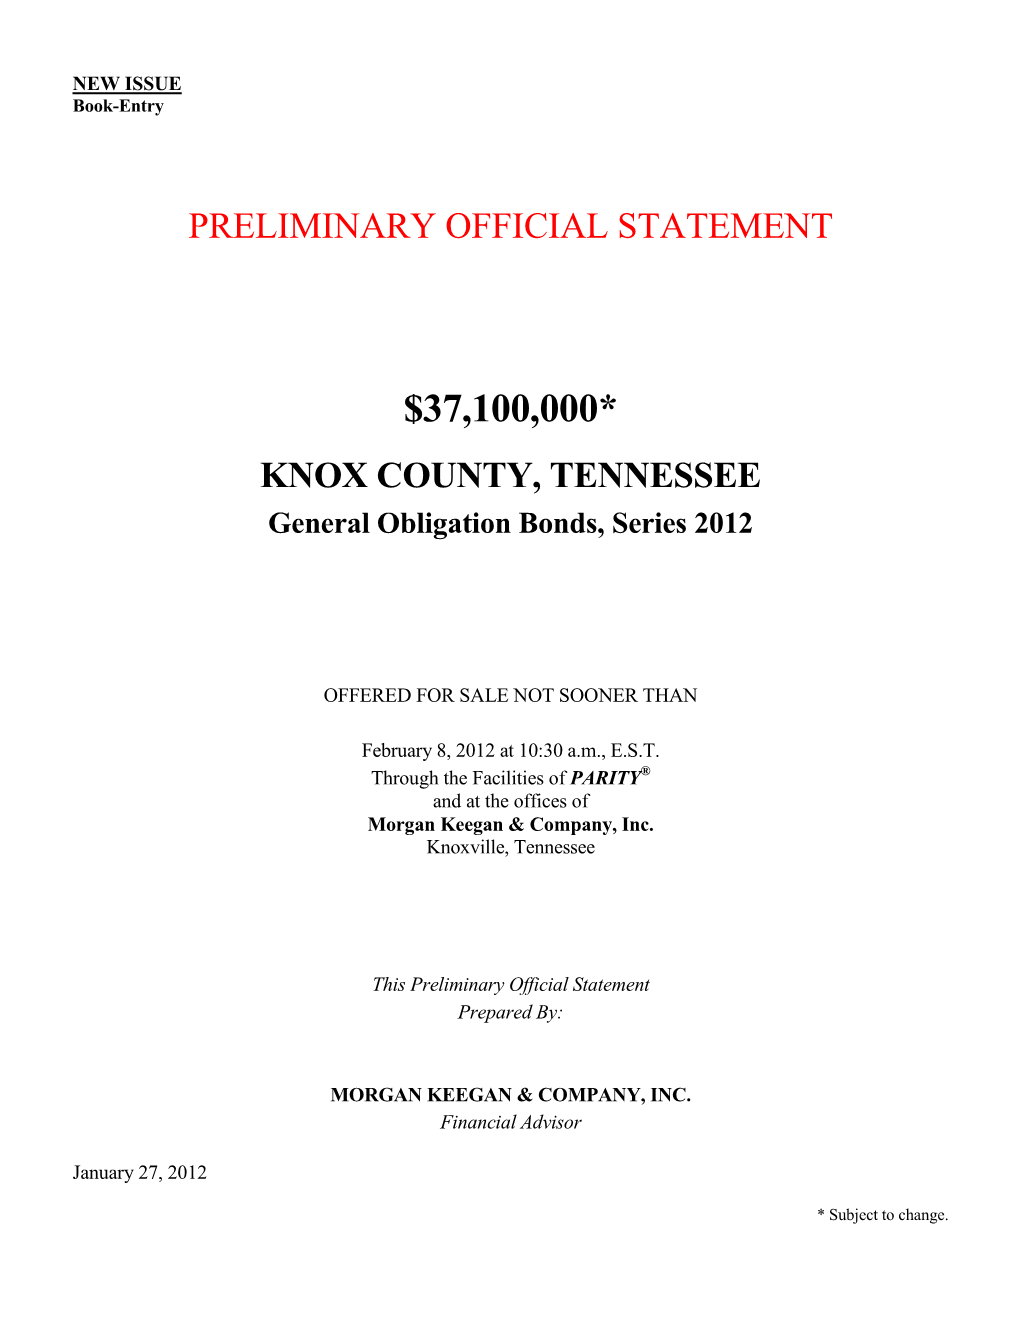 $37,100,000* Knox County, Tennessee